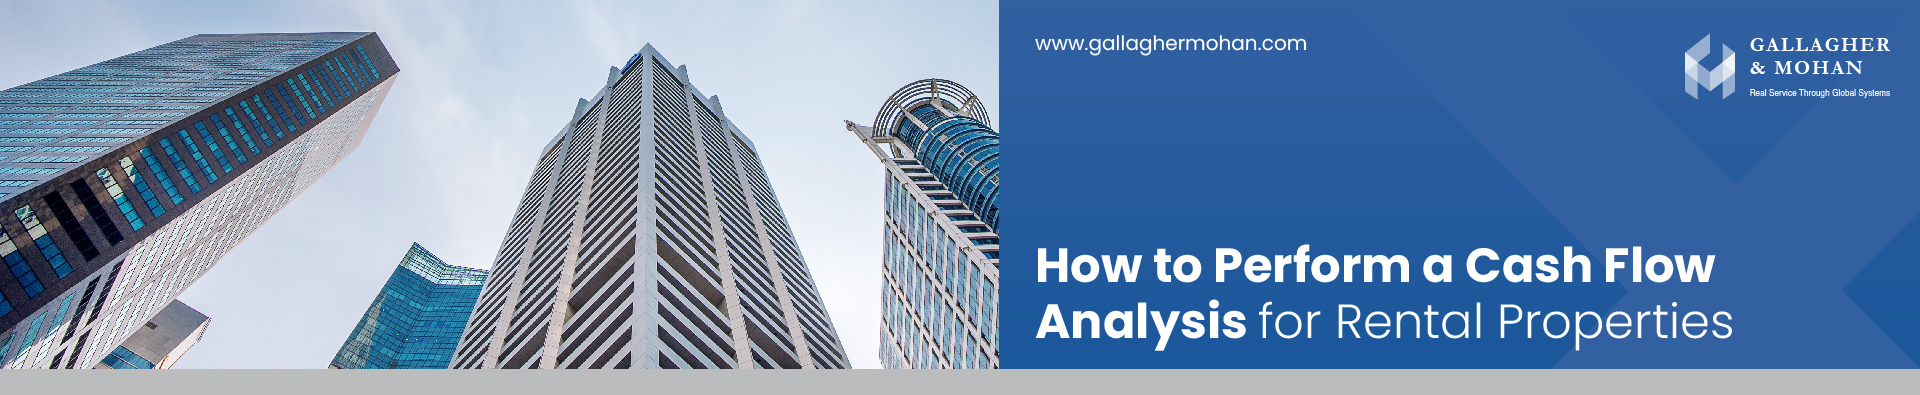 How To Perform A Cash Flow Analysis For Rental Properties